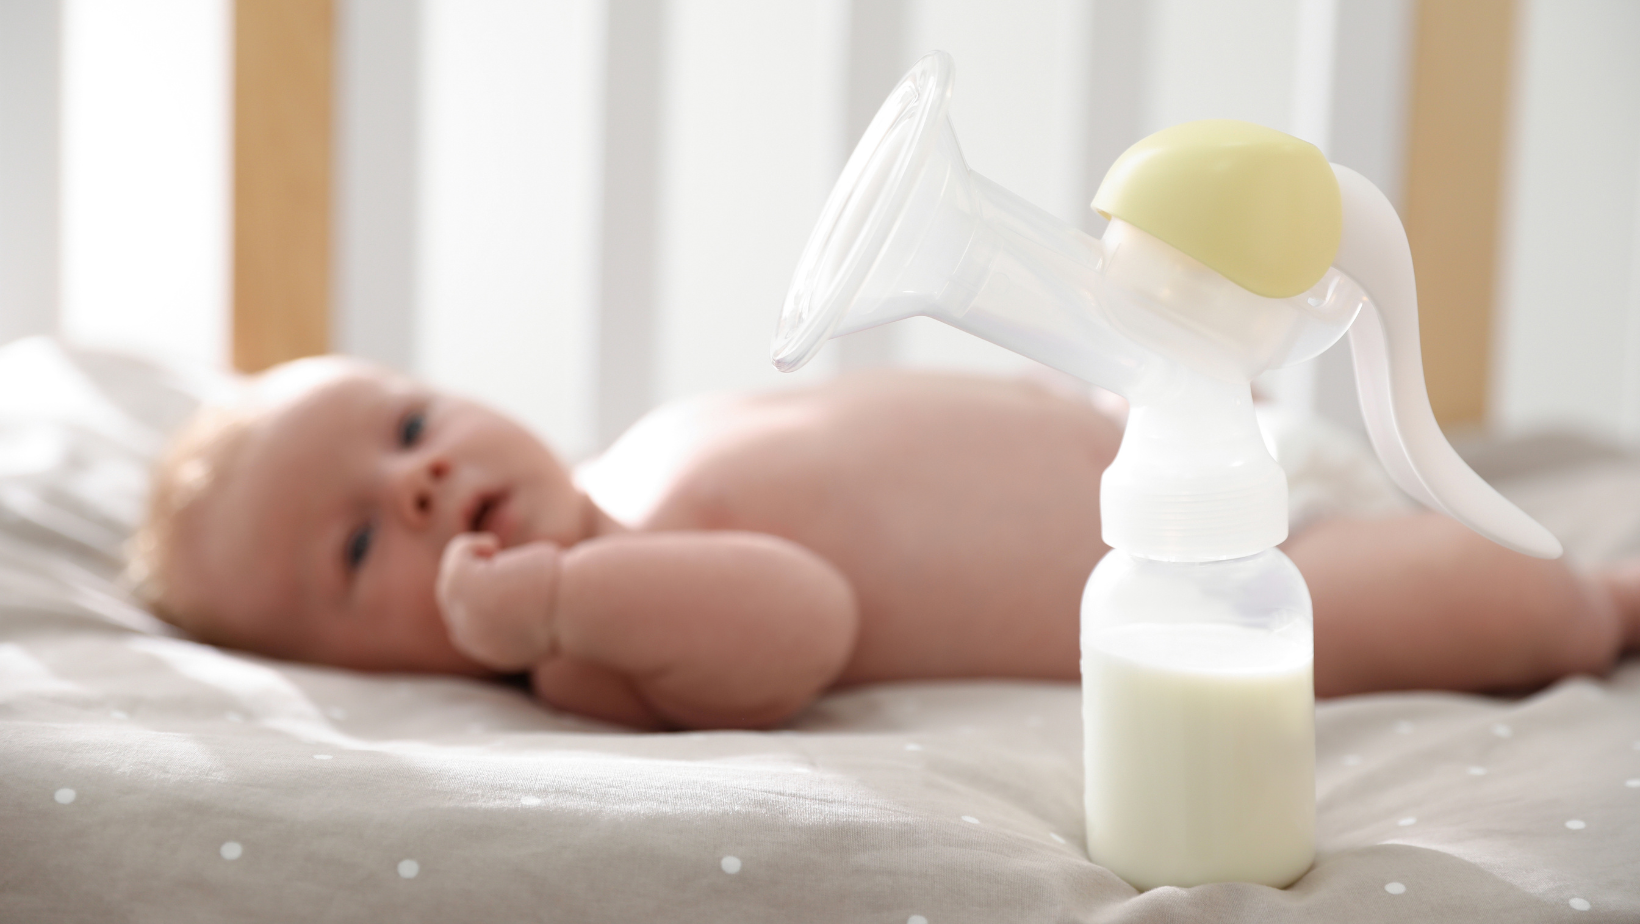 Exclusively Pumping for an Older Baby - Exclusive Pumping